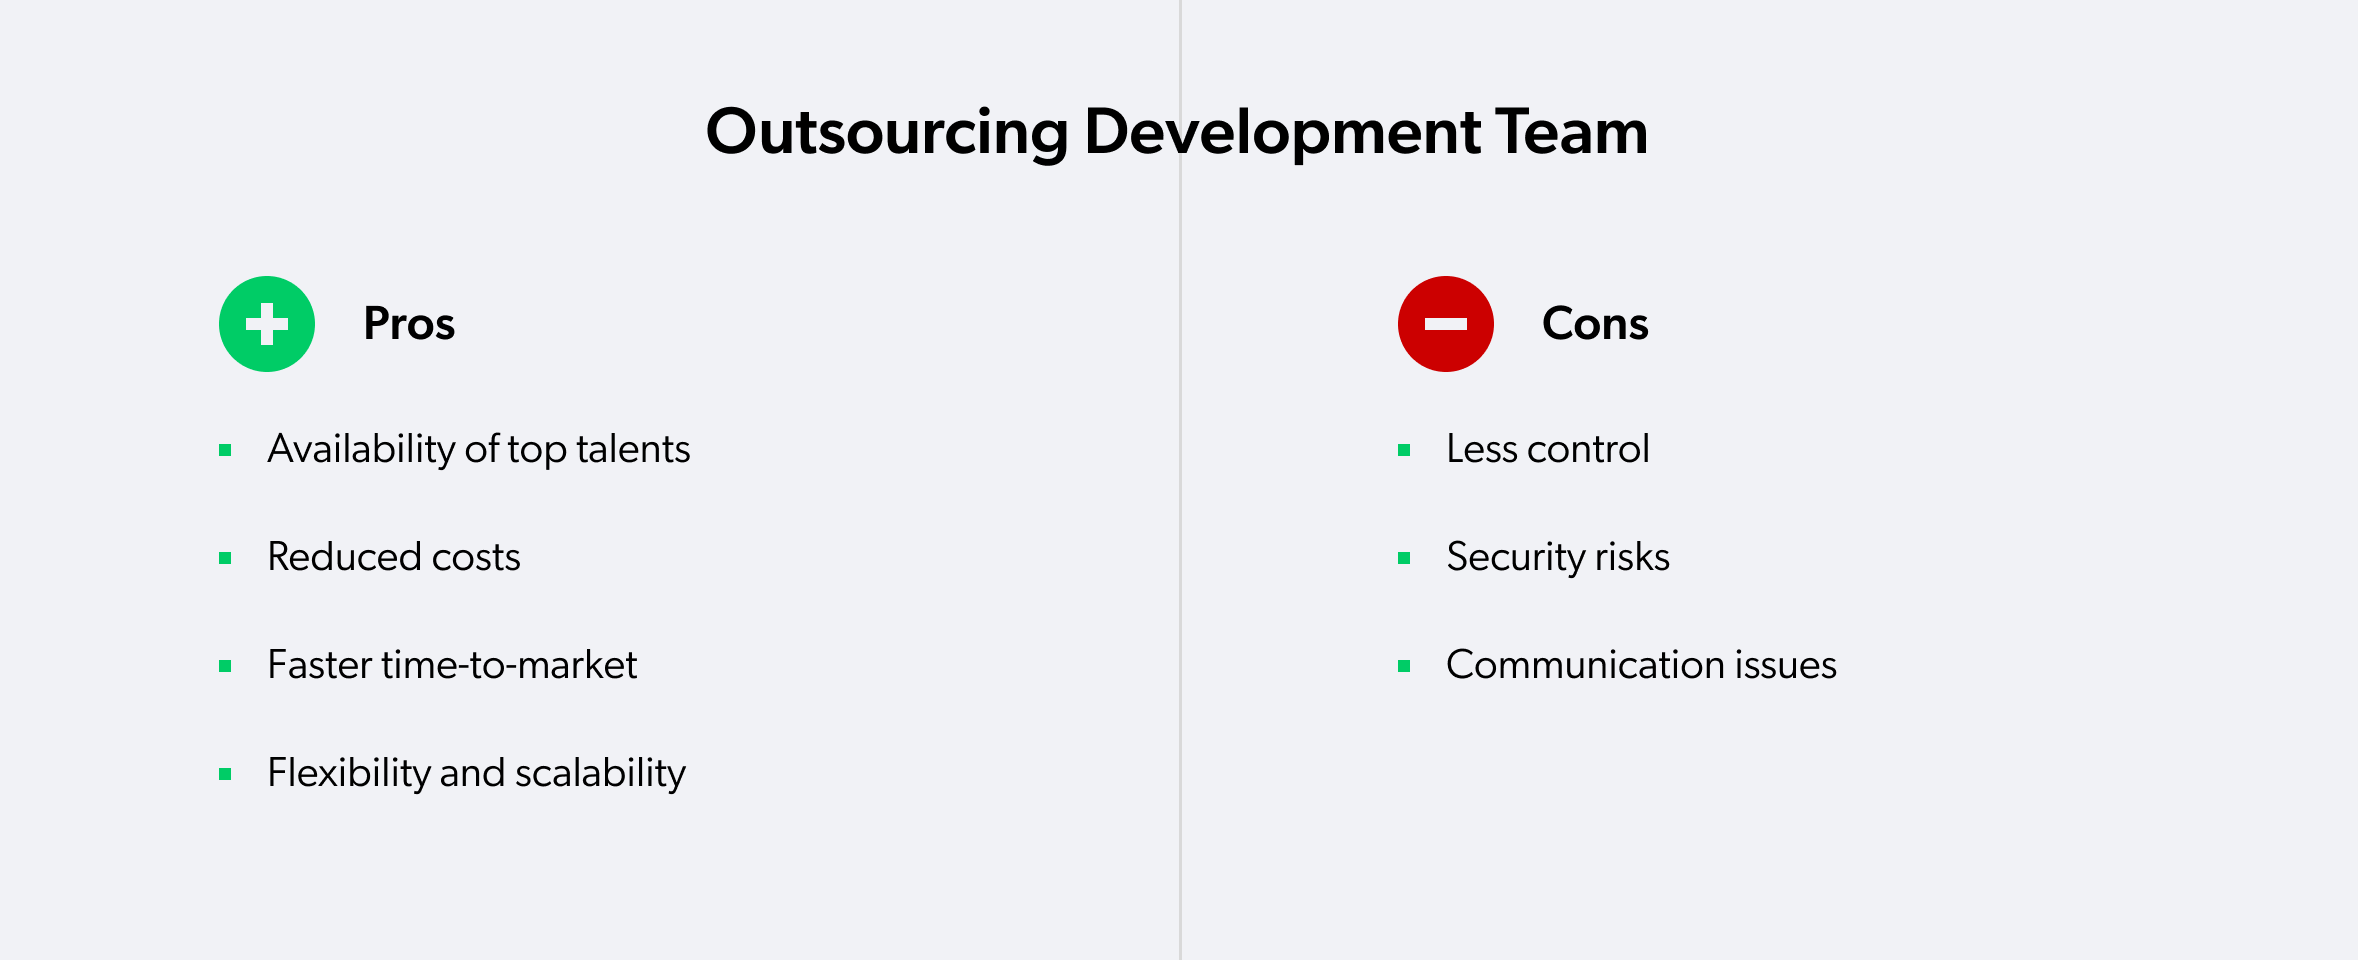 Outsourcing development team - pros and cons